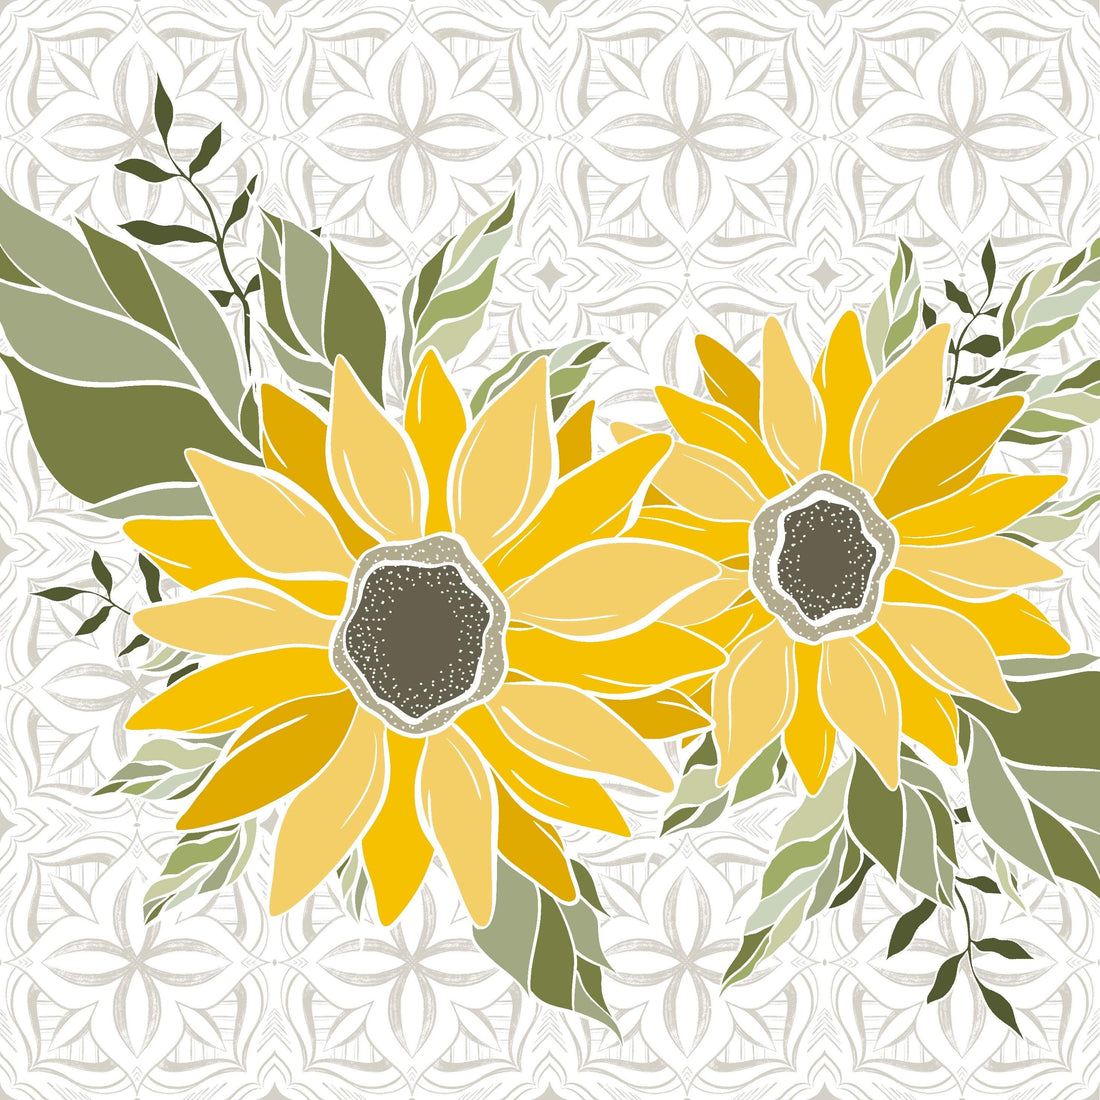 Art Deco Sunflowers - Artist by Thistle and Grace - Art Prints, Decoupage Rice Paper, Flat Canvas Prints, Giclee Prints, Greeting Cards, Photo Prints, Poster Prints, Scrapbook Paper